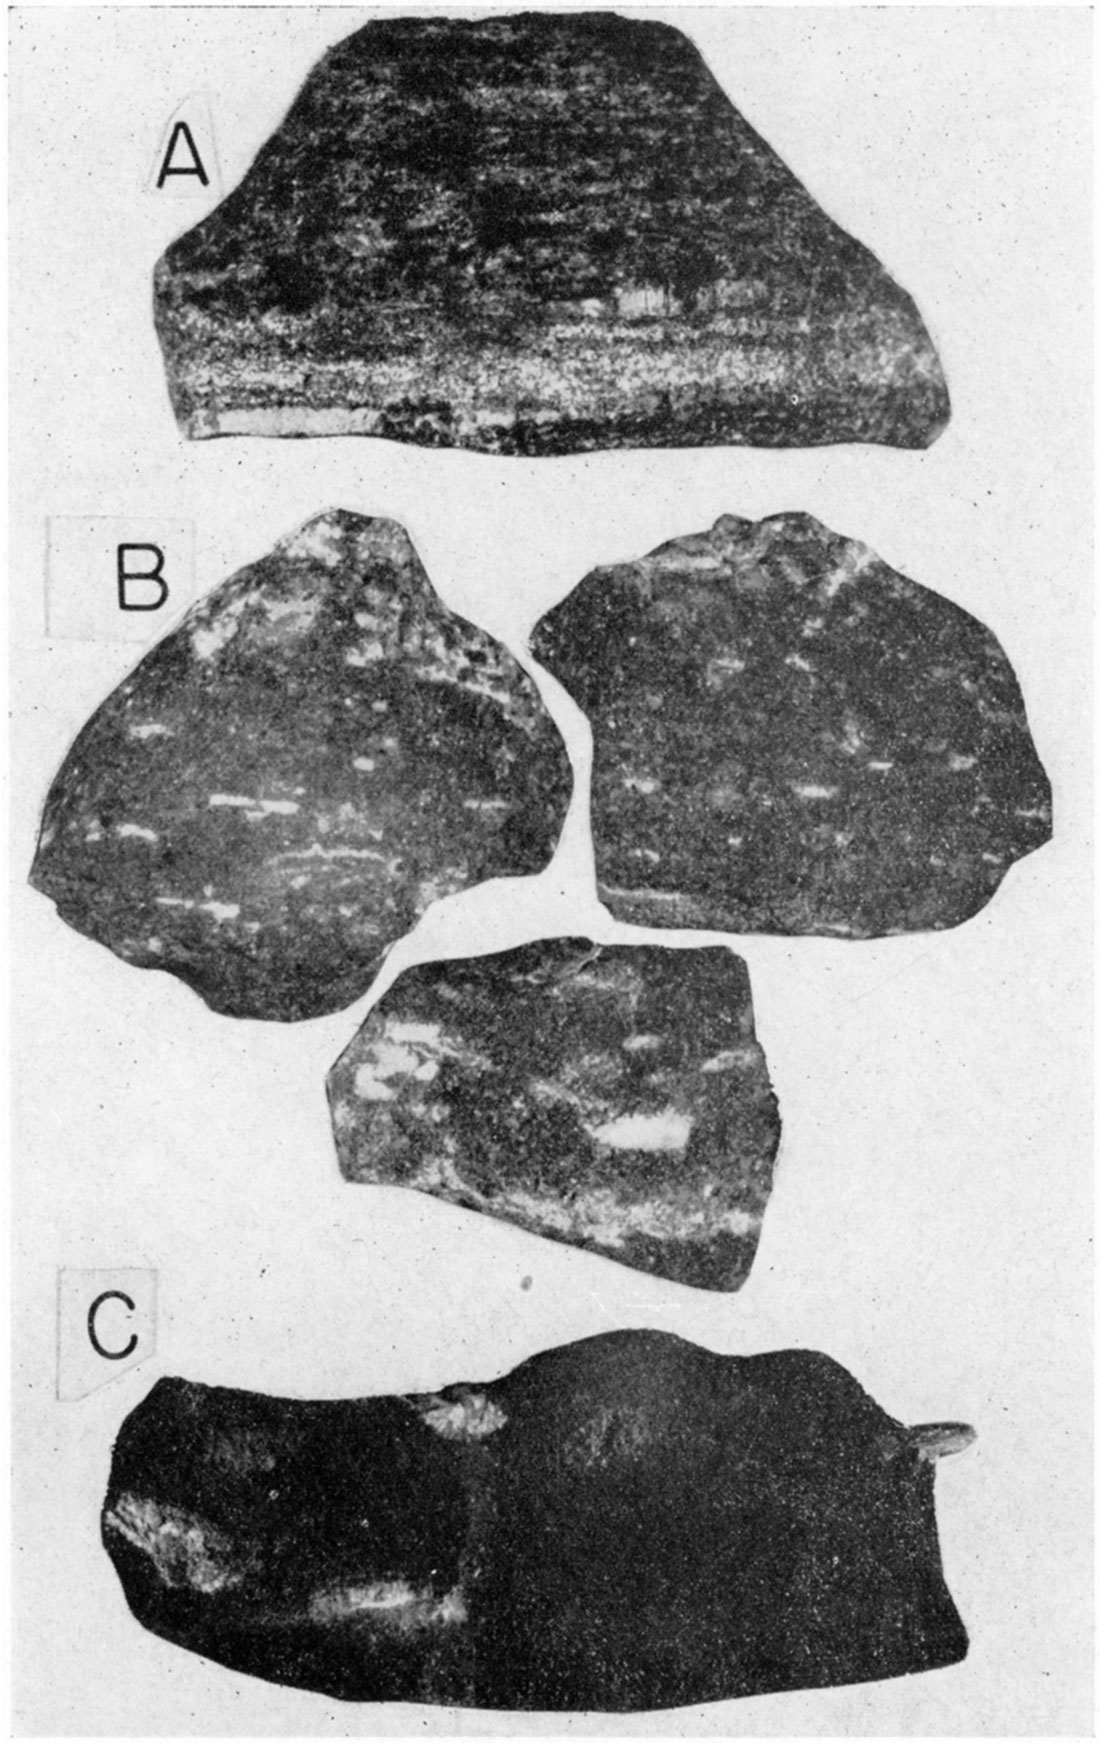 Photographs of chunk samples of McLouth sand shot from wells.